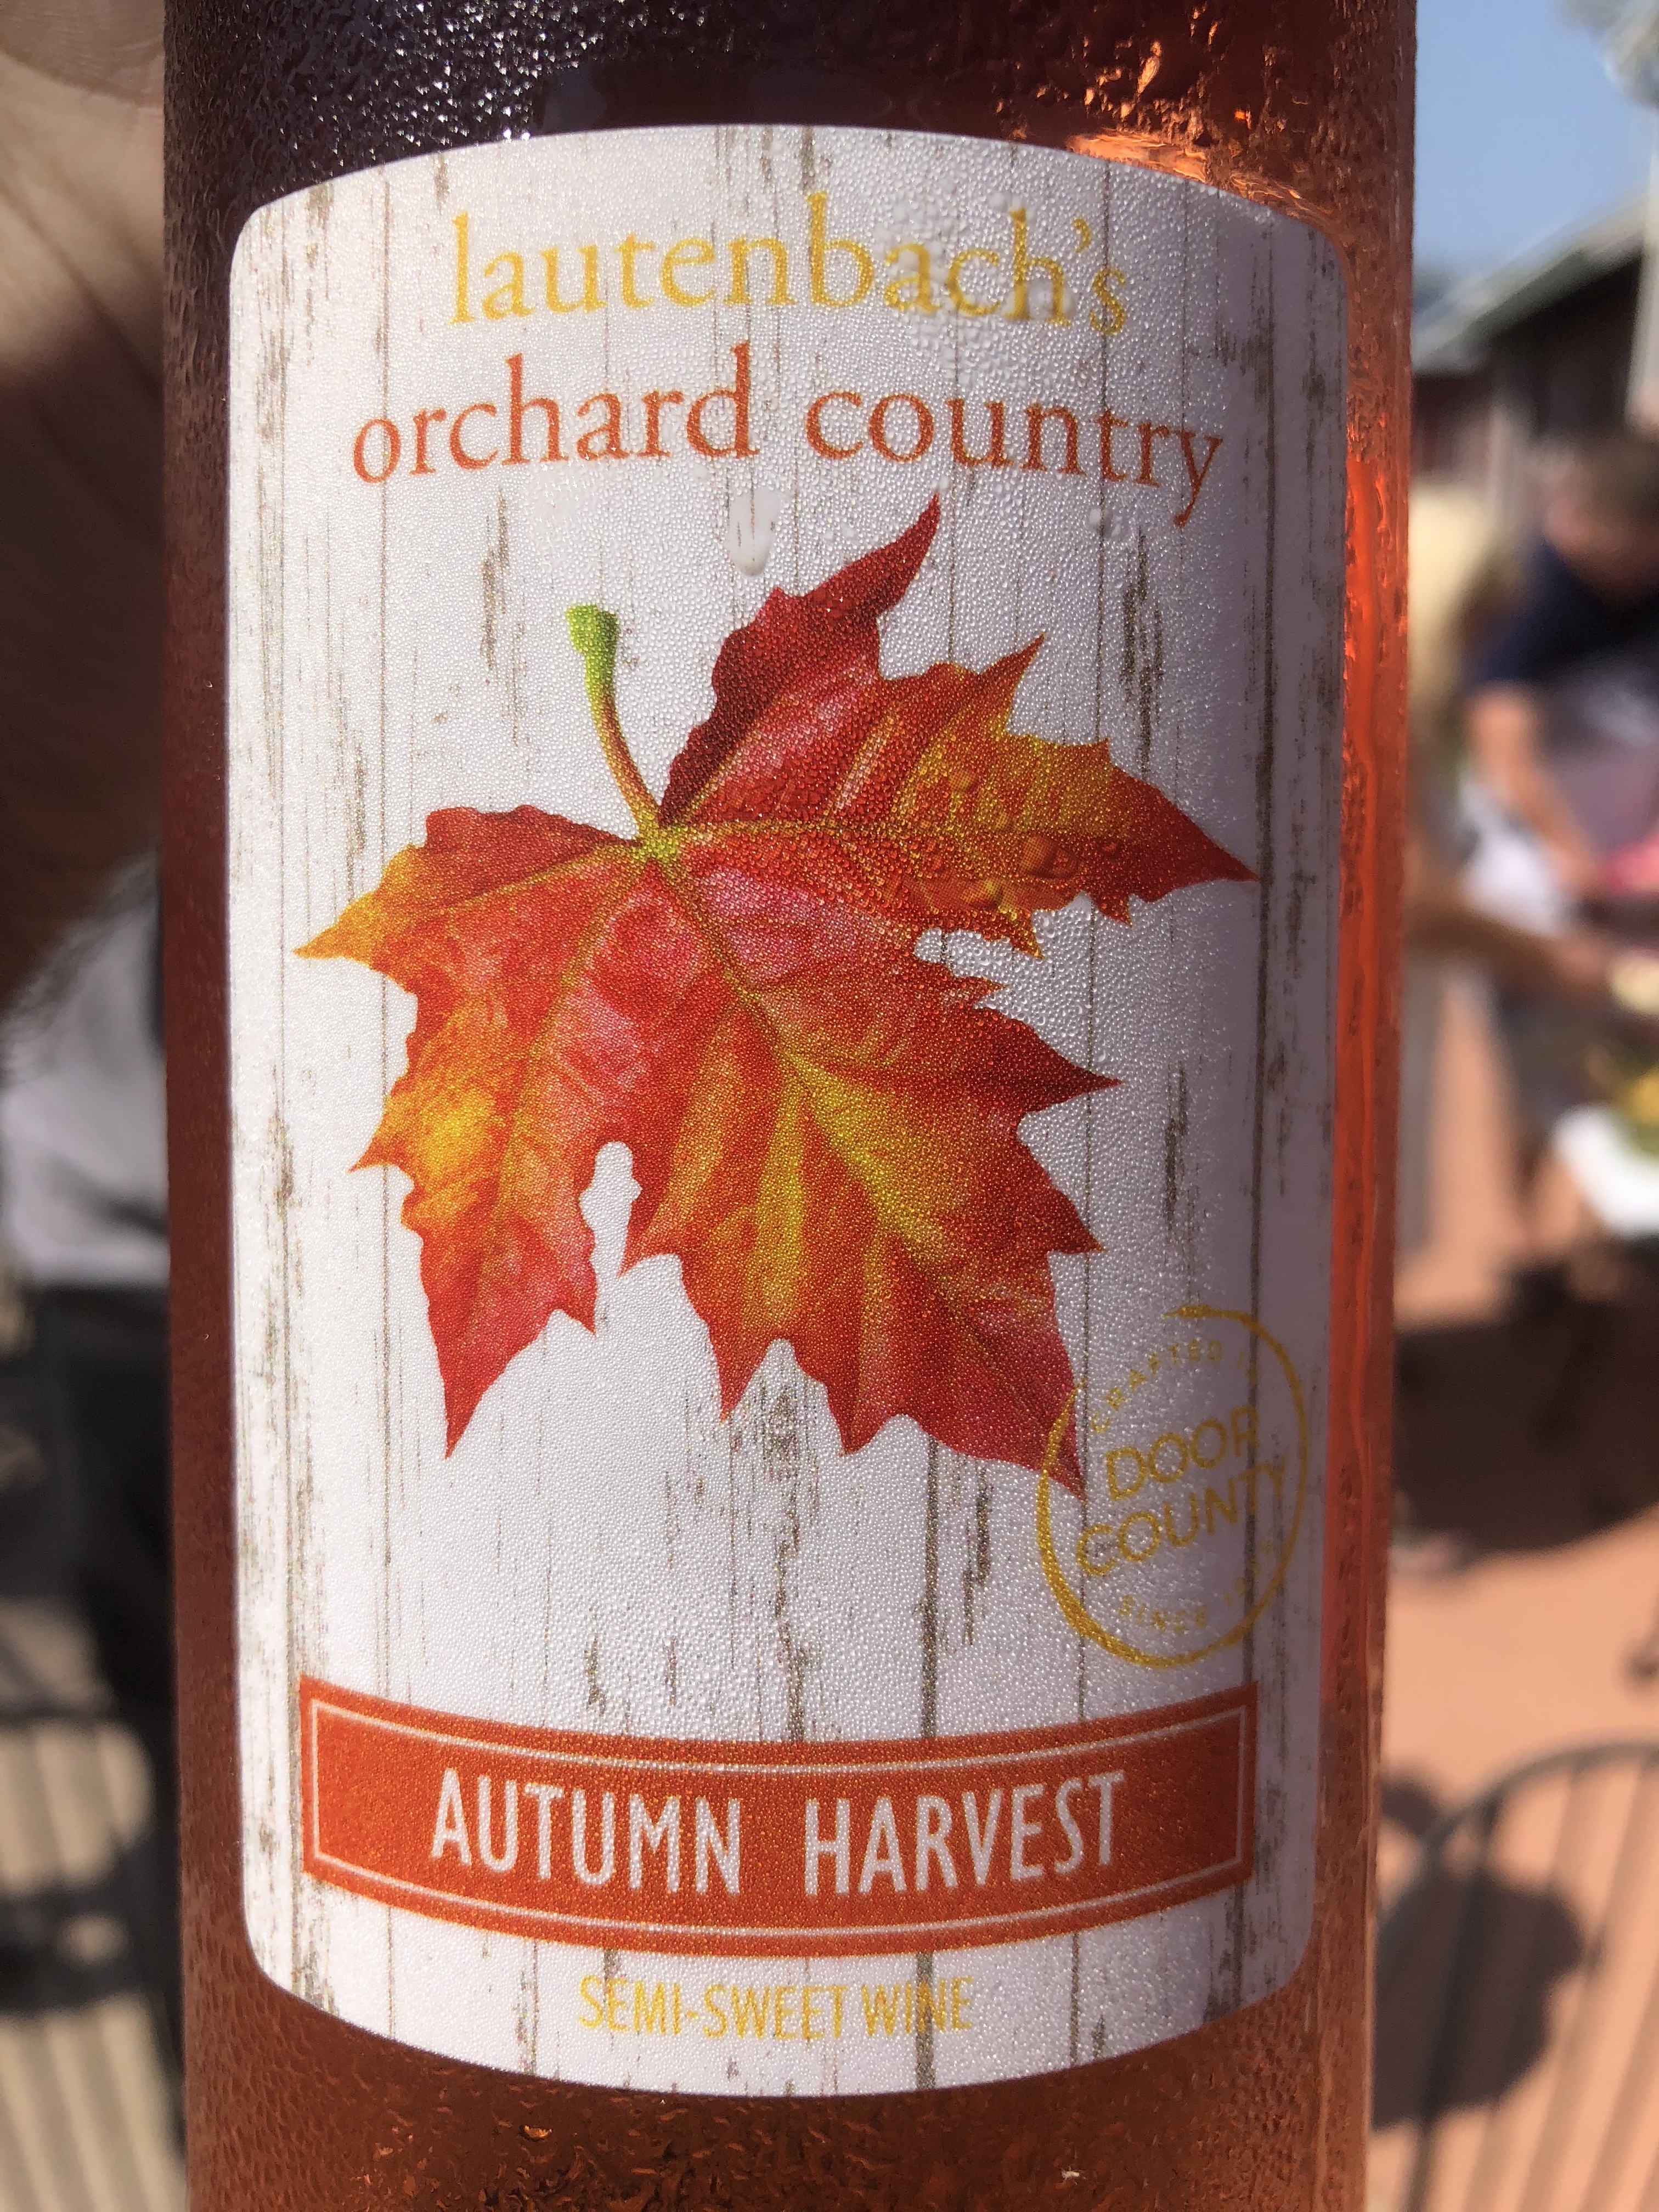 Lautenbach's Orchard Country - Autumn Harvest - N.V.
